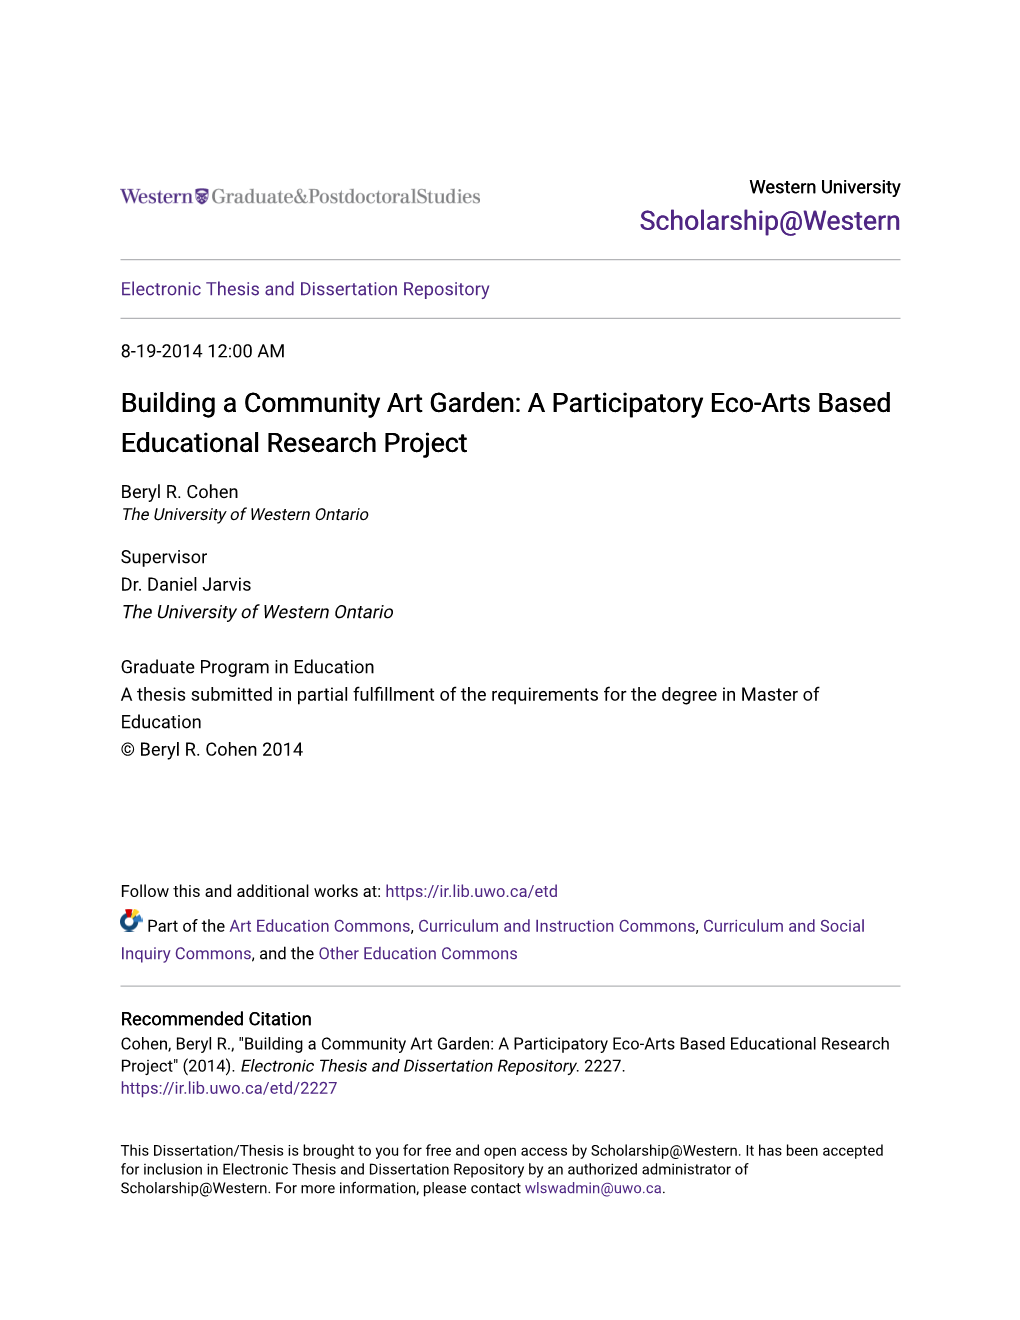 Building a Community Art Garden: a Participatory Eco-Arts Based Educational Research Project